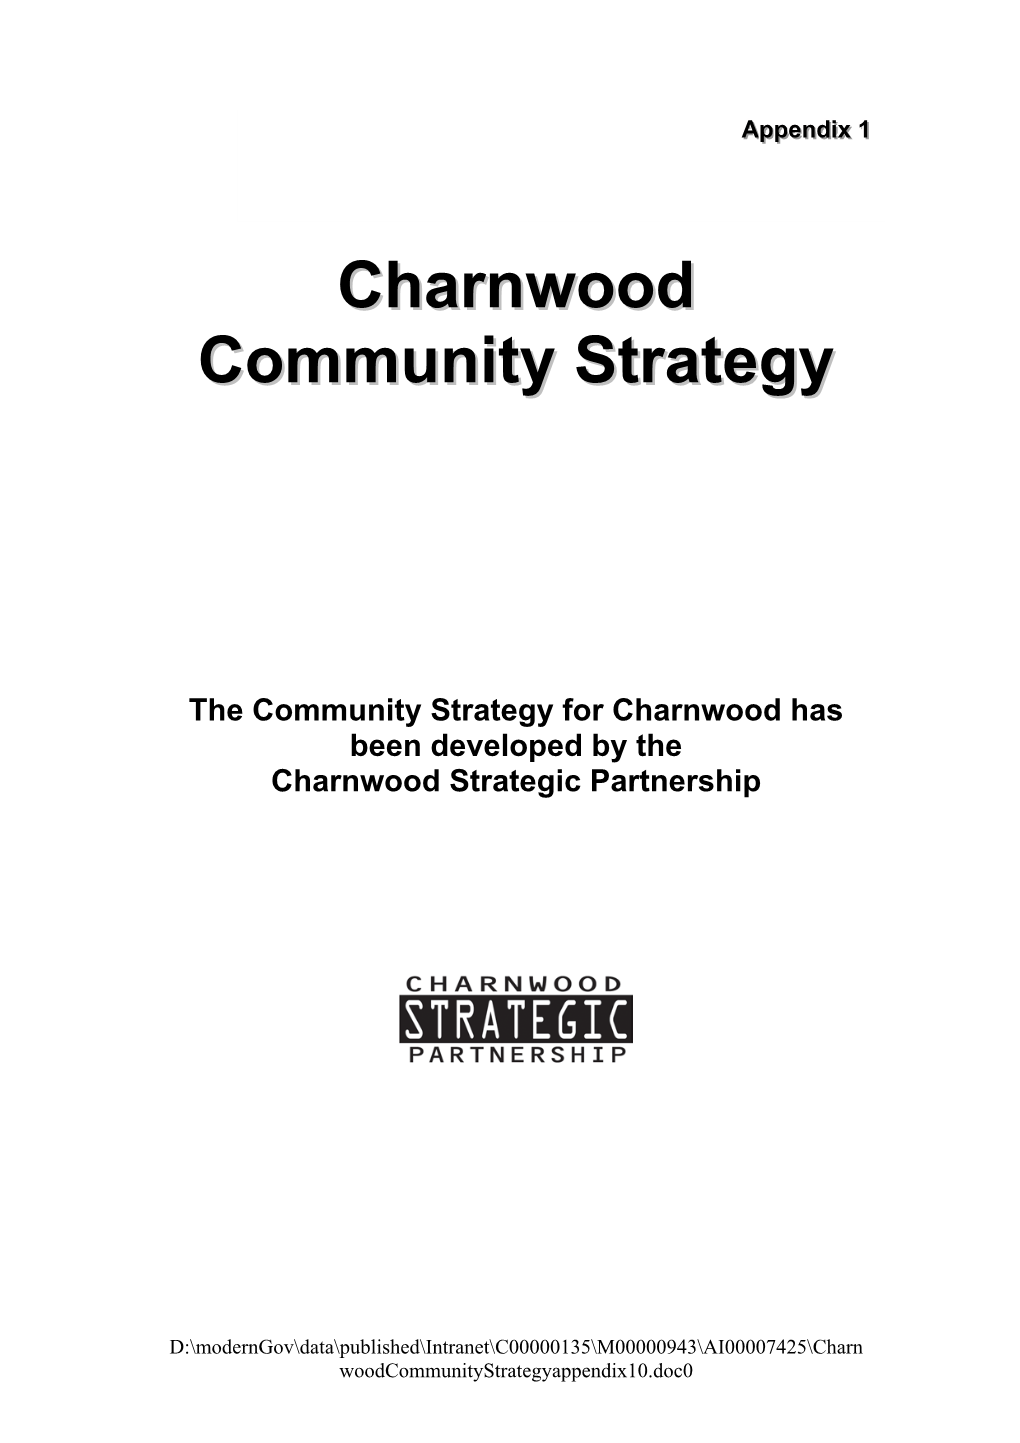 Charnwood Has Been Developed by the Charnwood Strategic Partnership